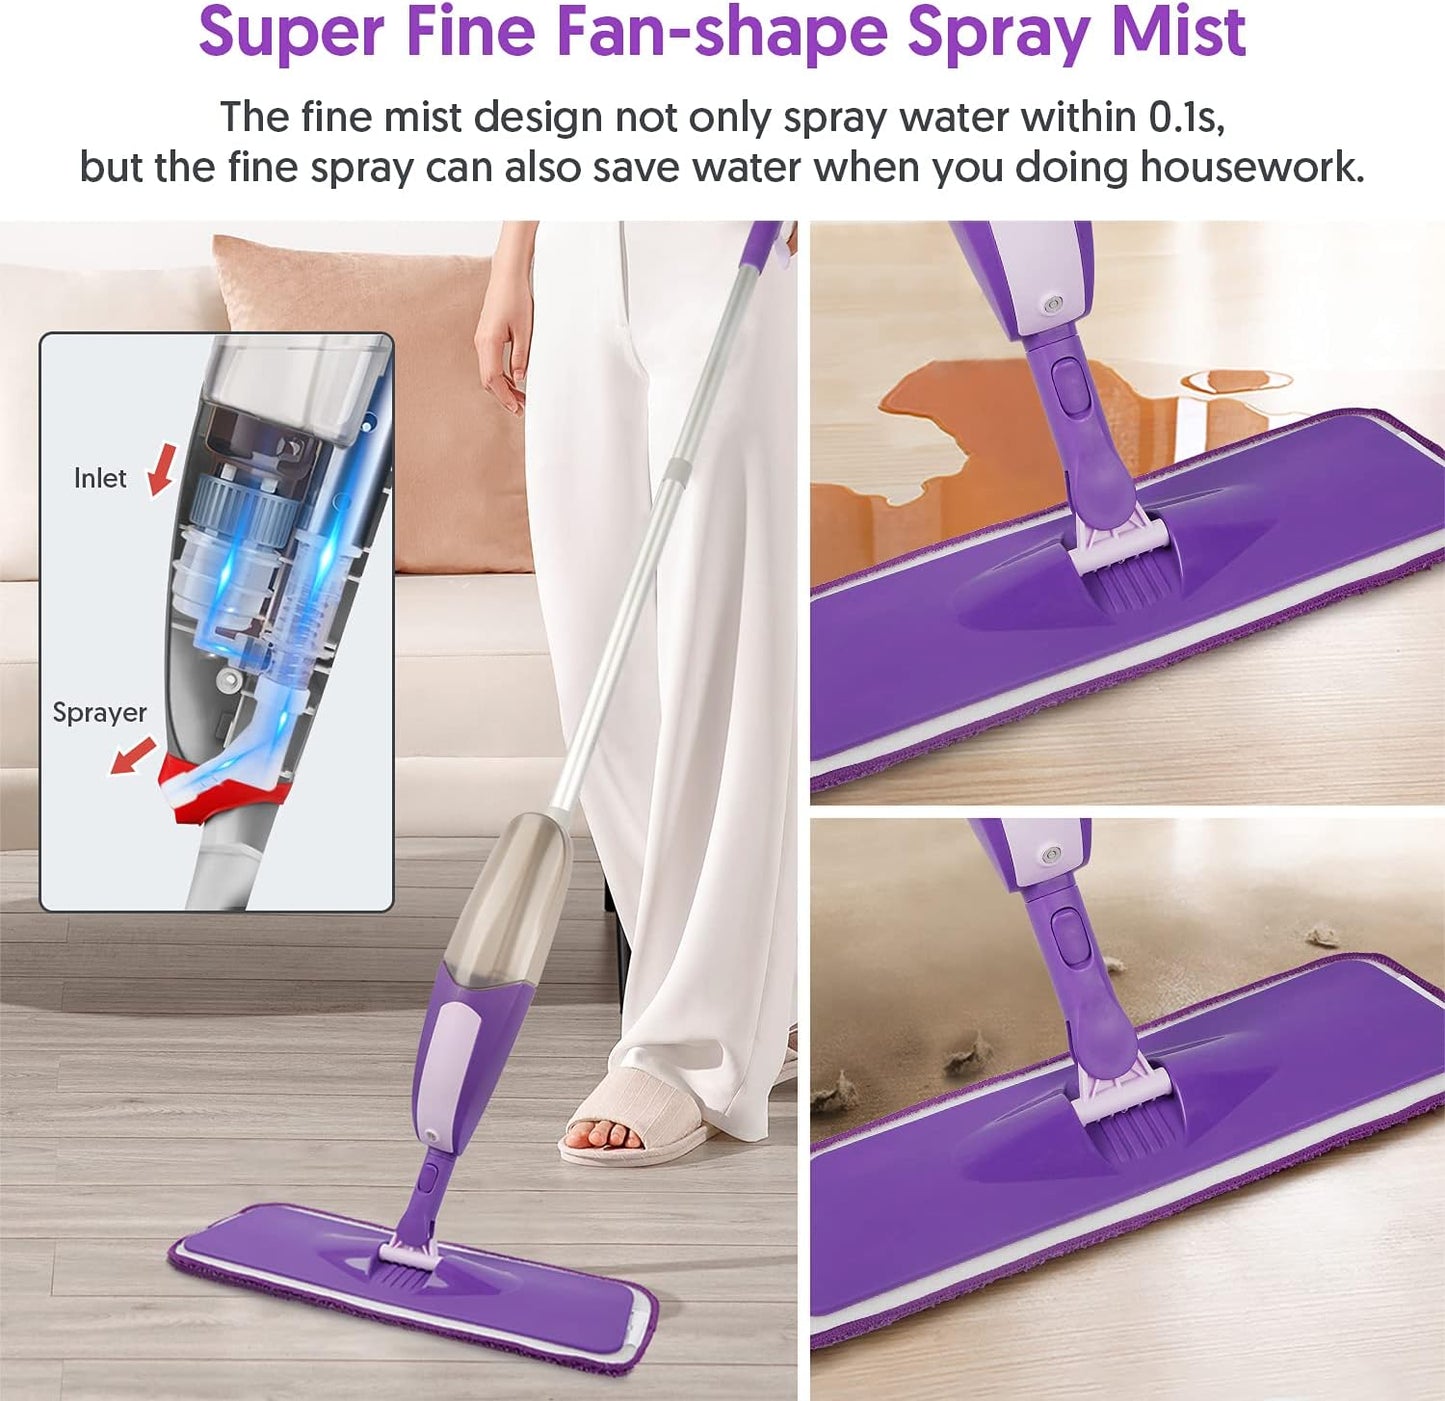 SEVENMAX Spray Mops for Floor Cleaning - Microfiber Floor Mop Dust Mop with 550ML Refillable Bottle & 3 PCS Washable Pads Kitchen Dry Wet Mop for Cleaning Hardwood Laminate Wood Ceramic Tiles Floor